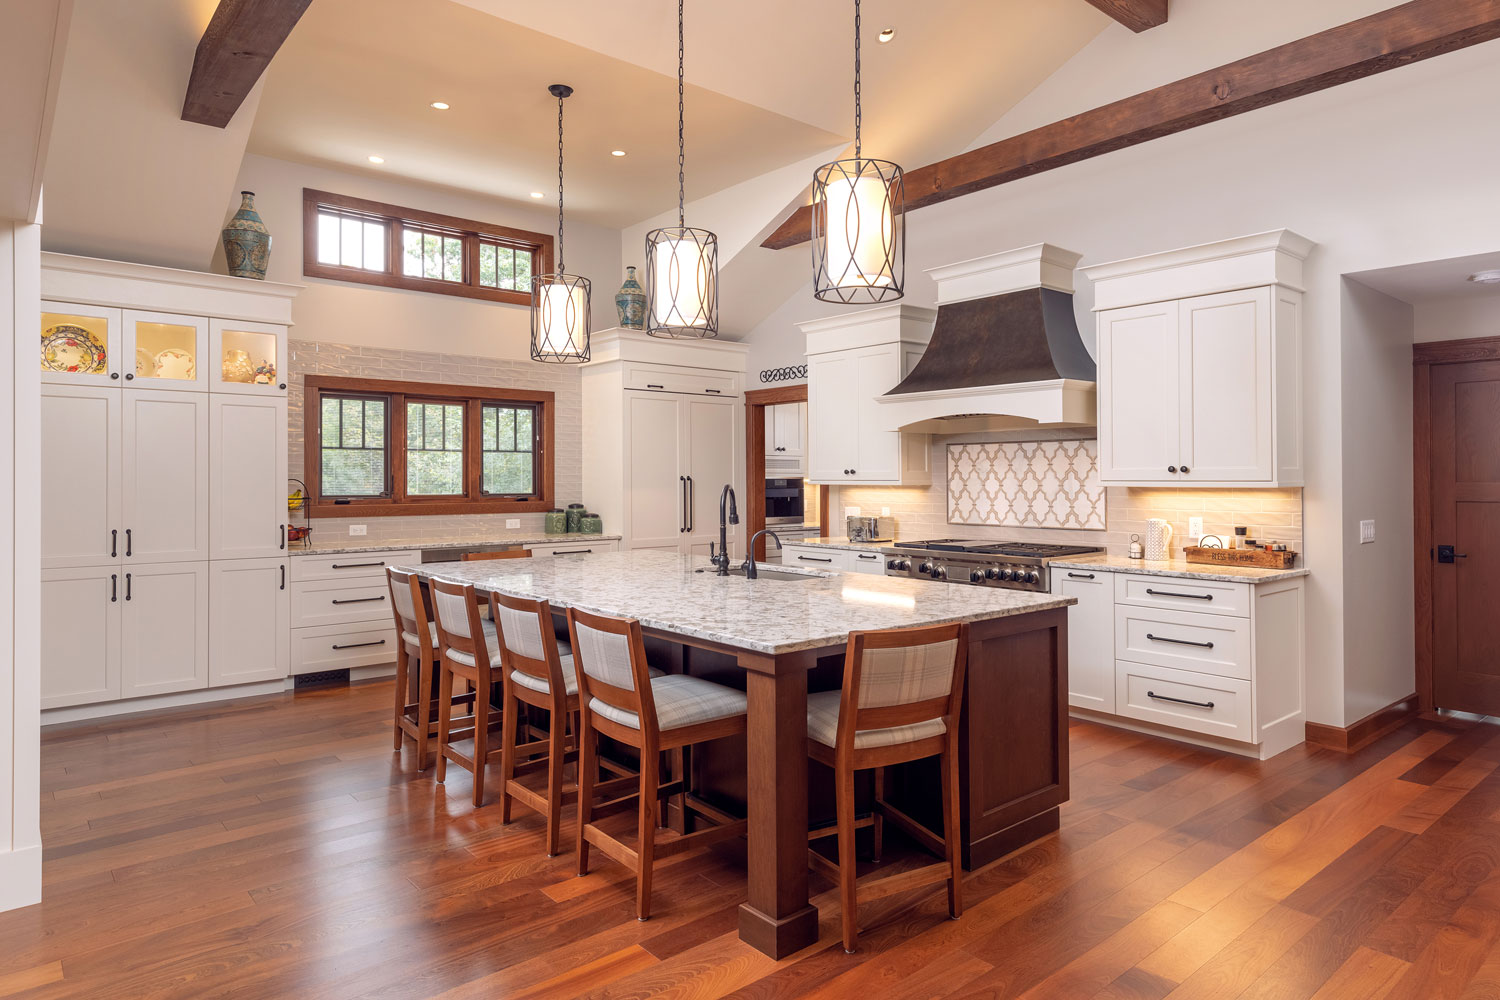 kitchen with timber ceiling beams